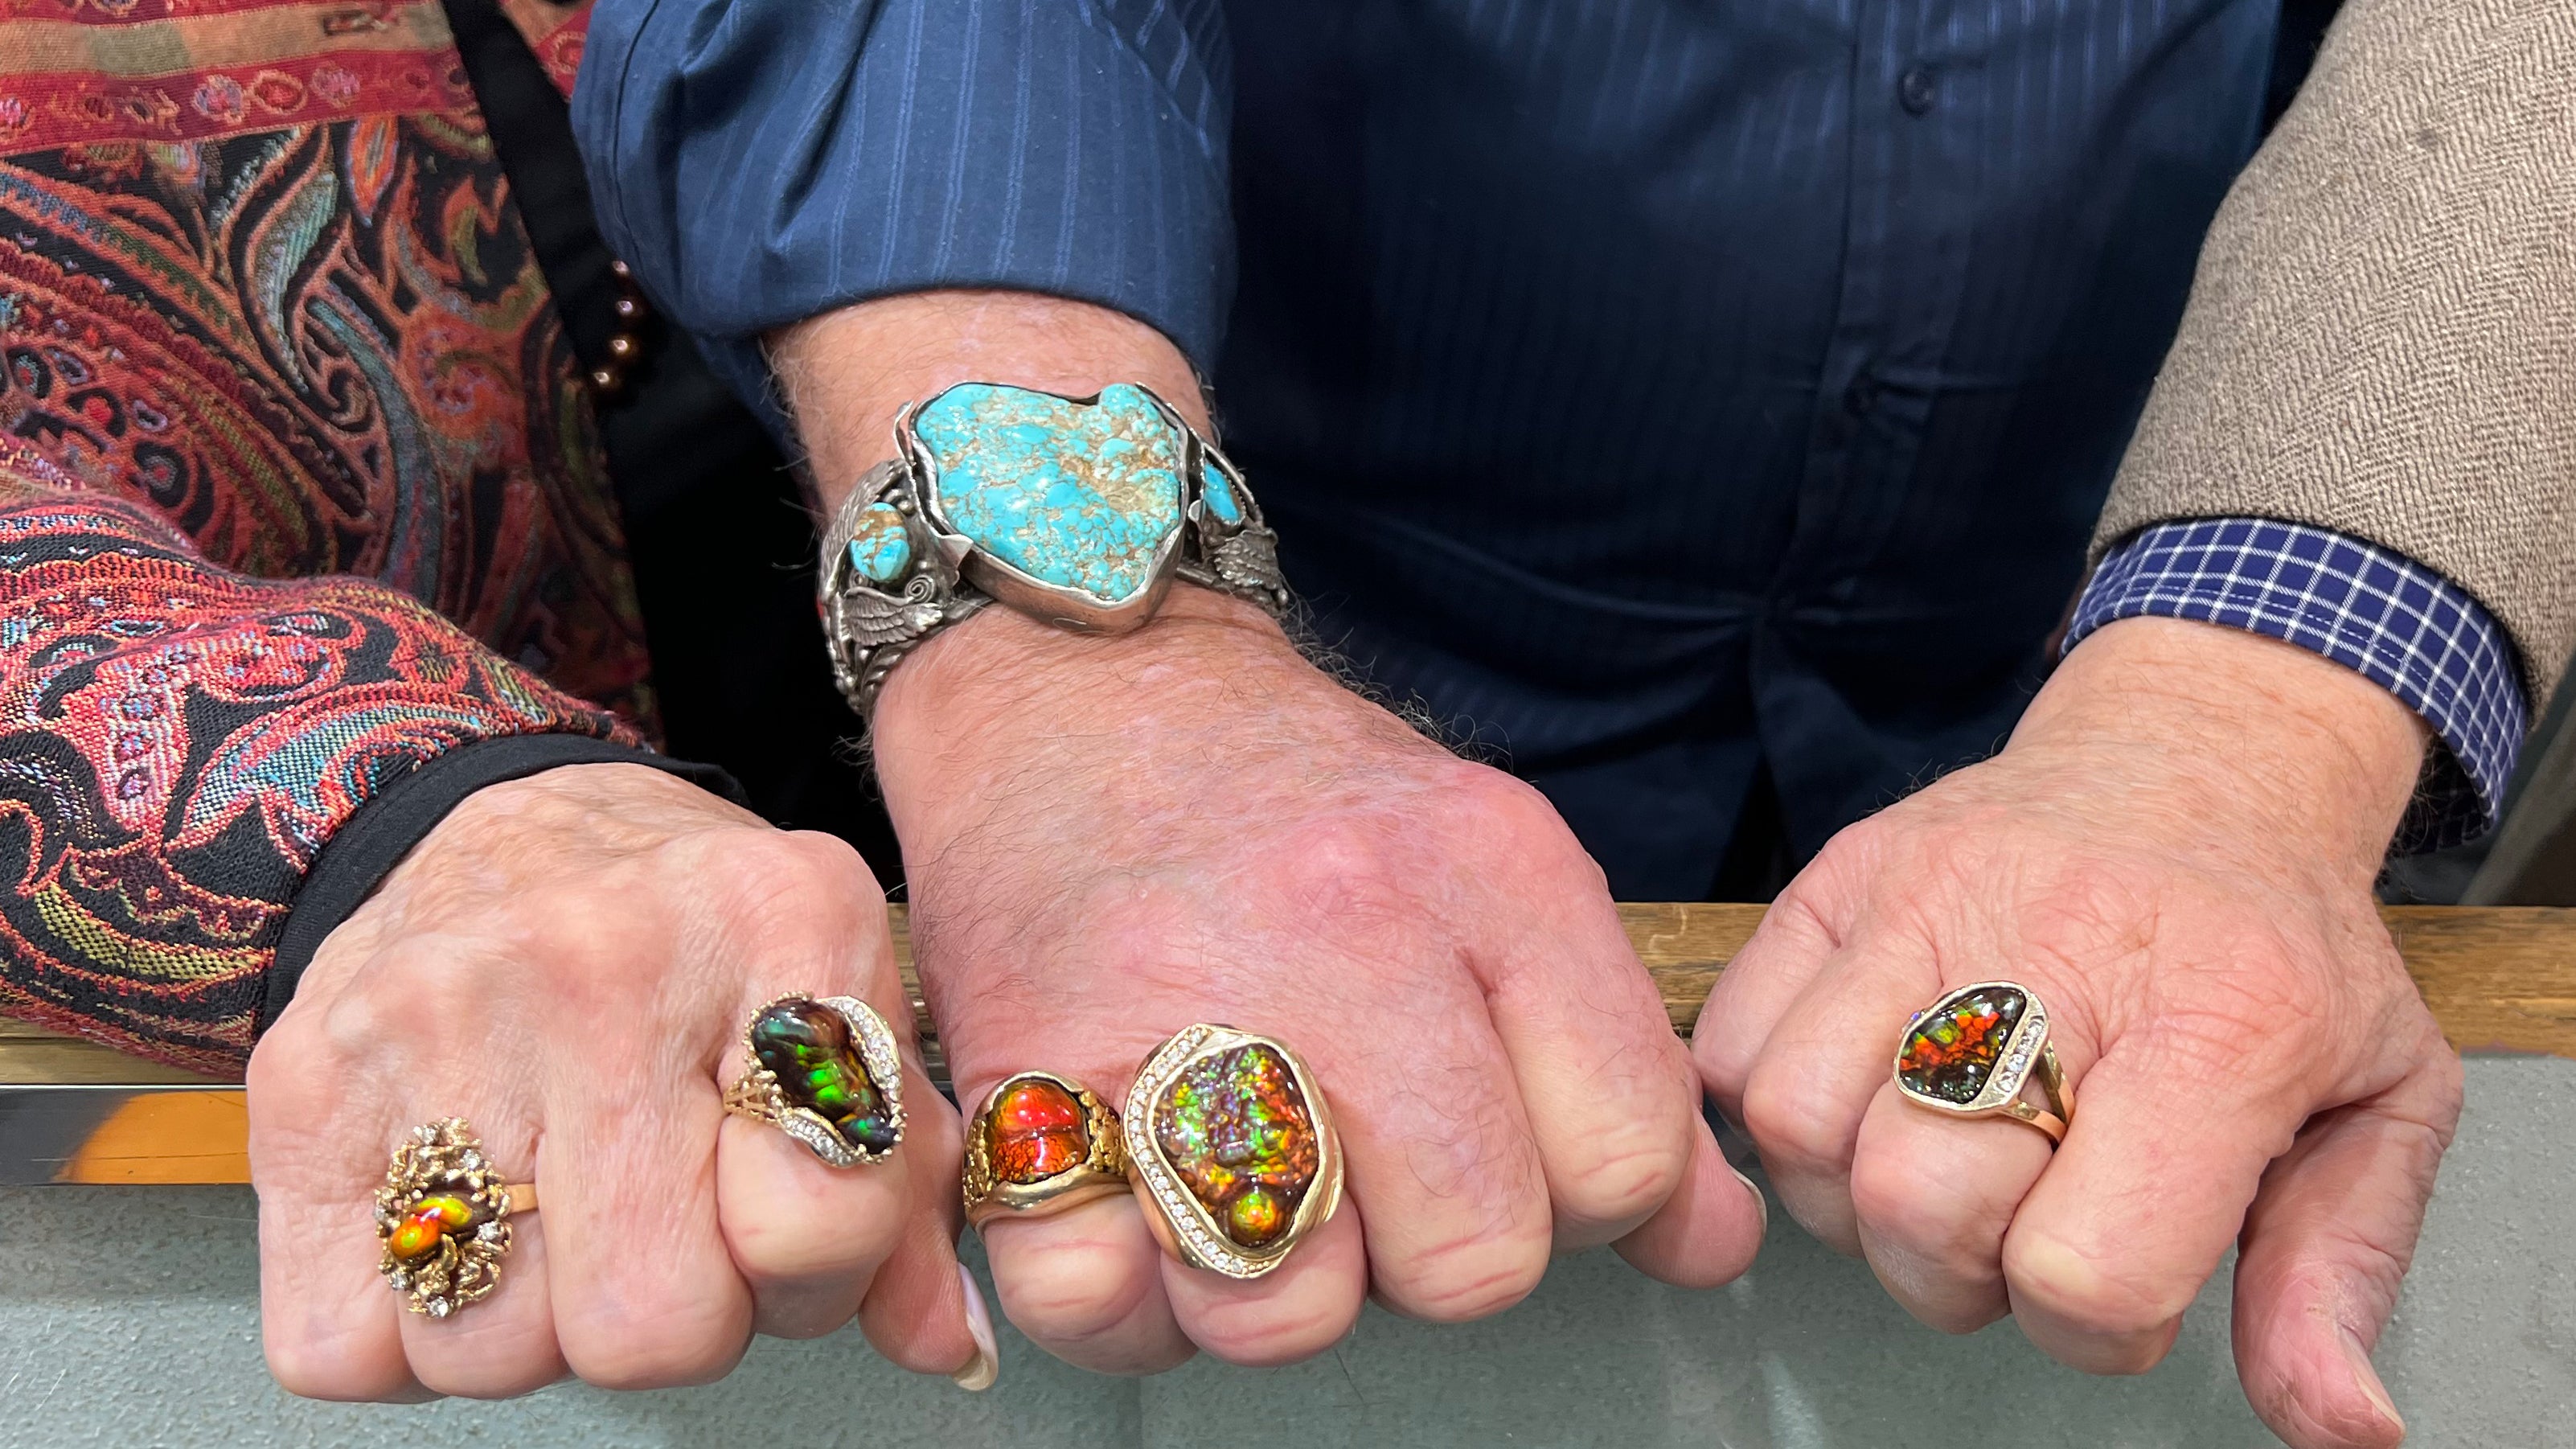 Three peoples' hands, one woman and two men, wearing gold rings set with vibrantly colorful fire agate stones.